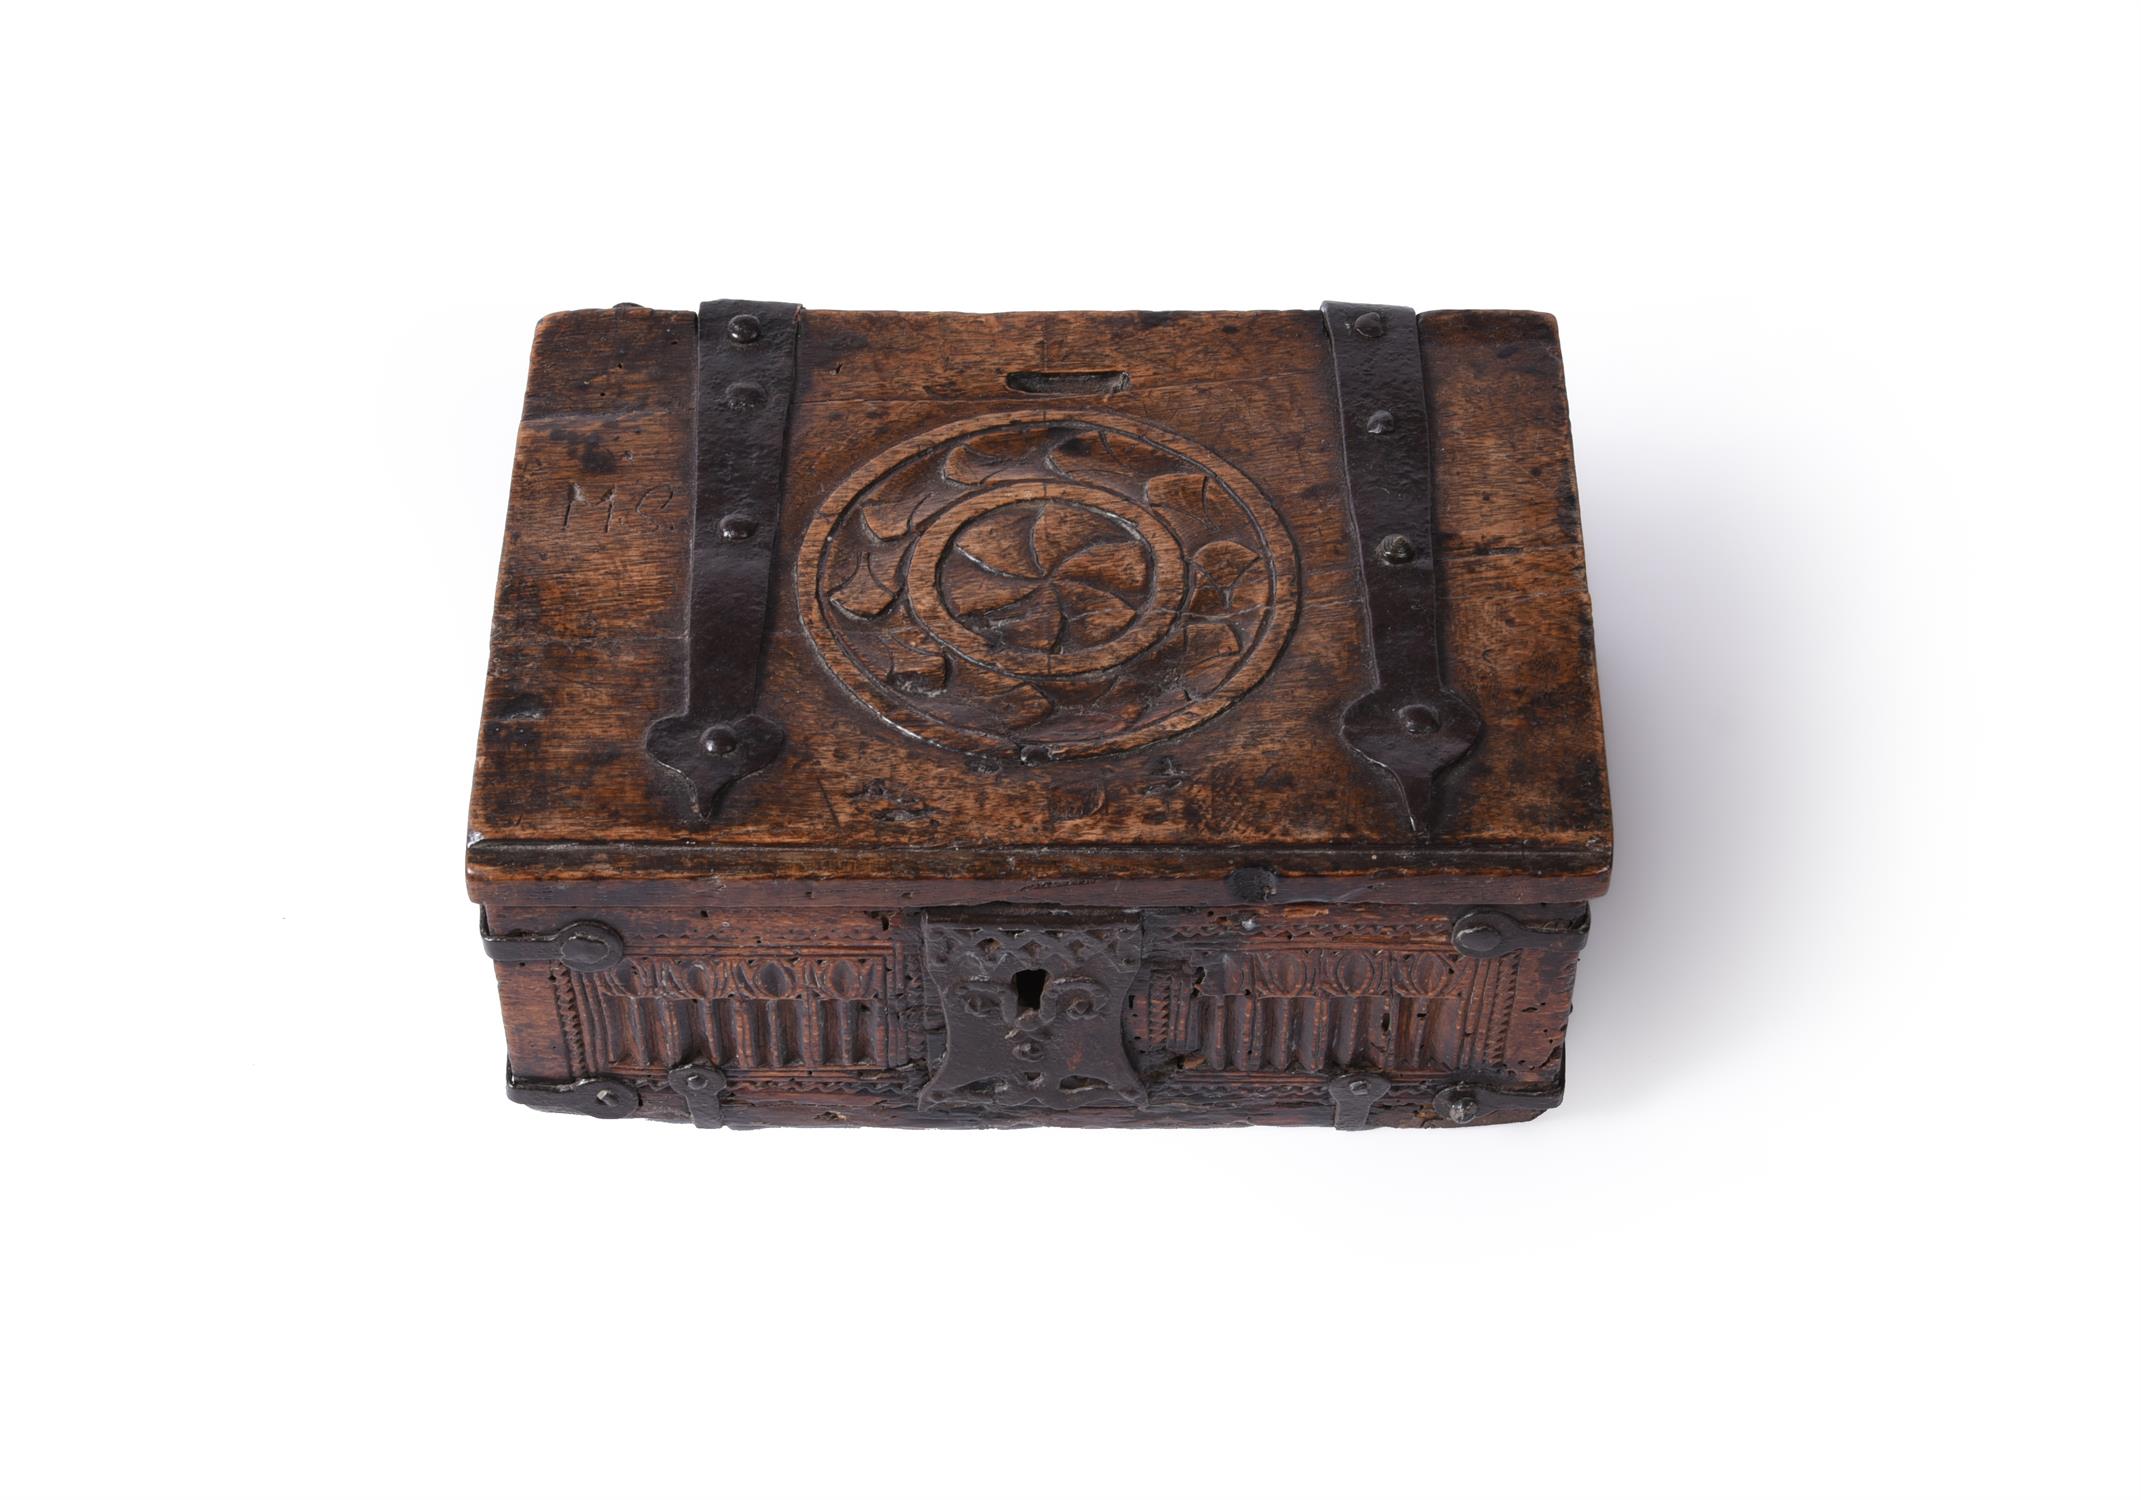 A North European carved oak and wrought iron bound offertory or alms box, 17th century - Image 8 of 10